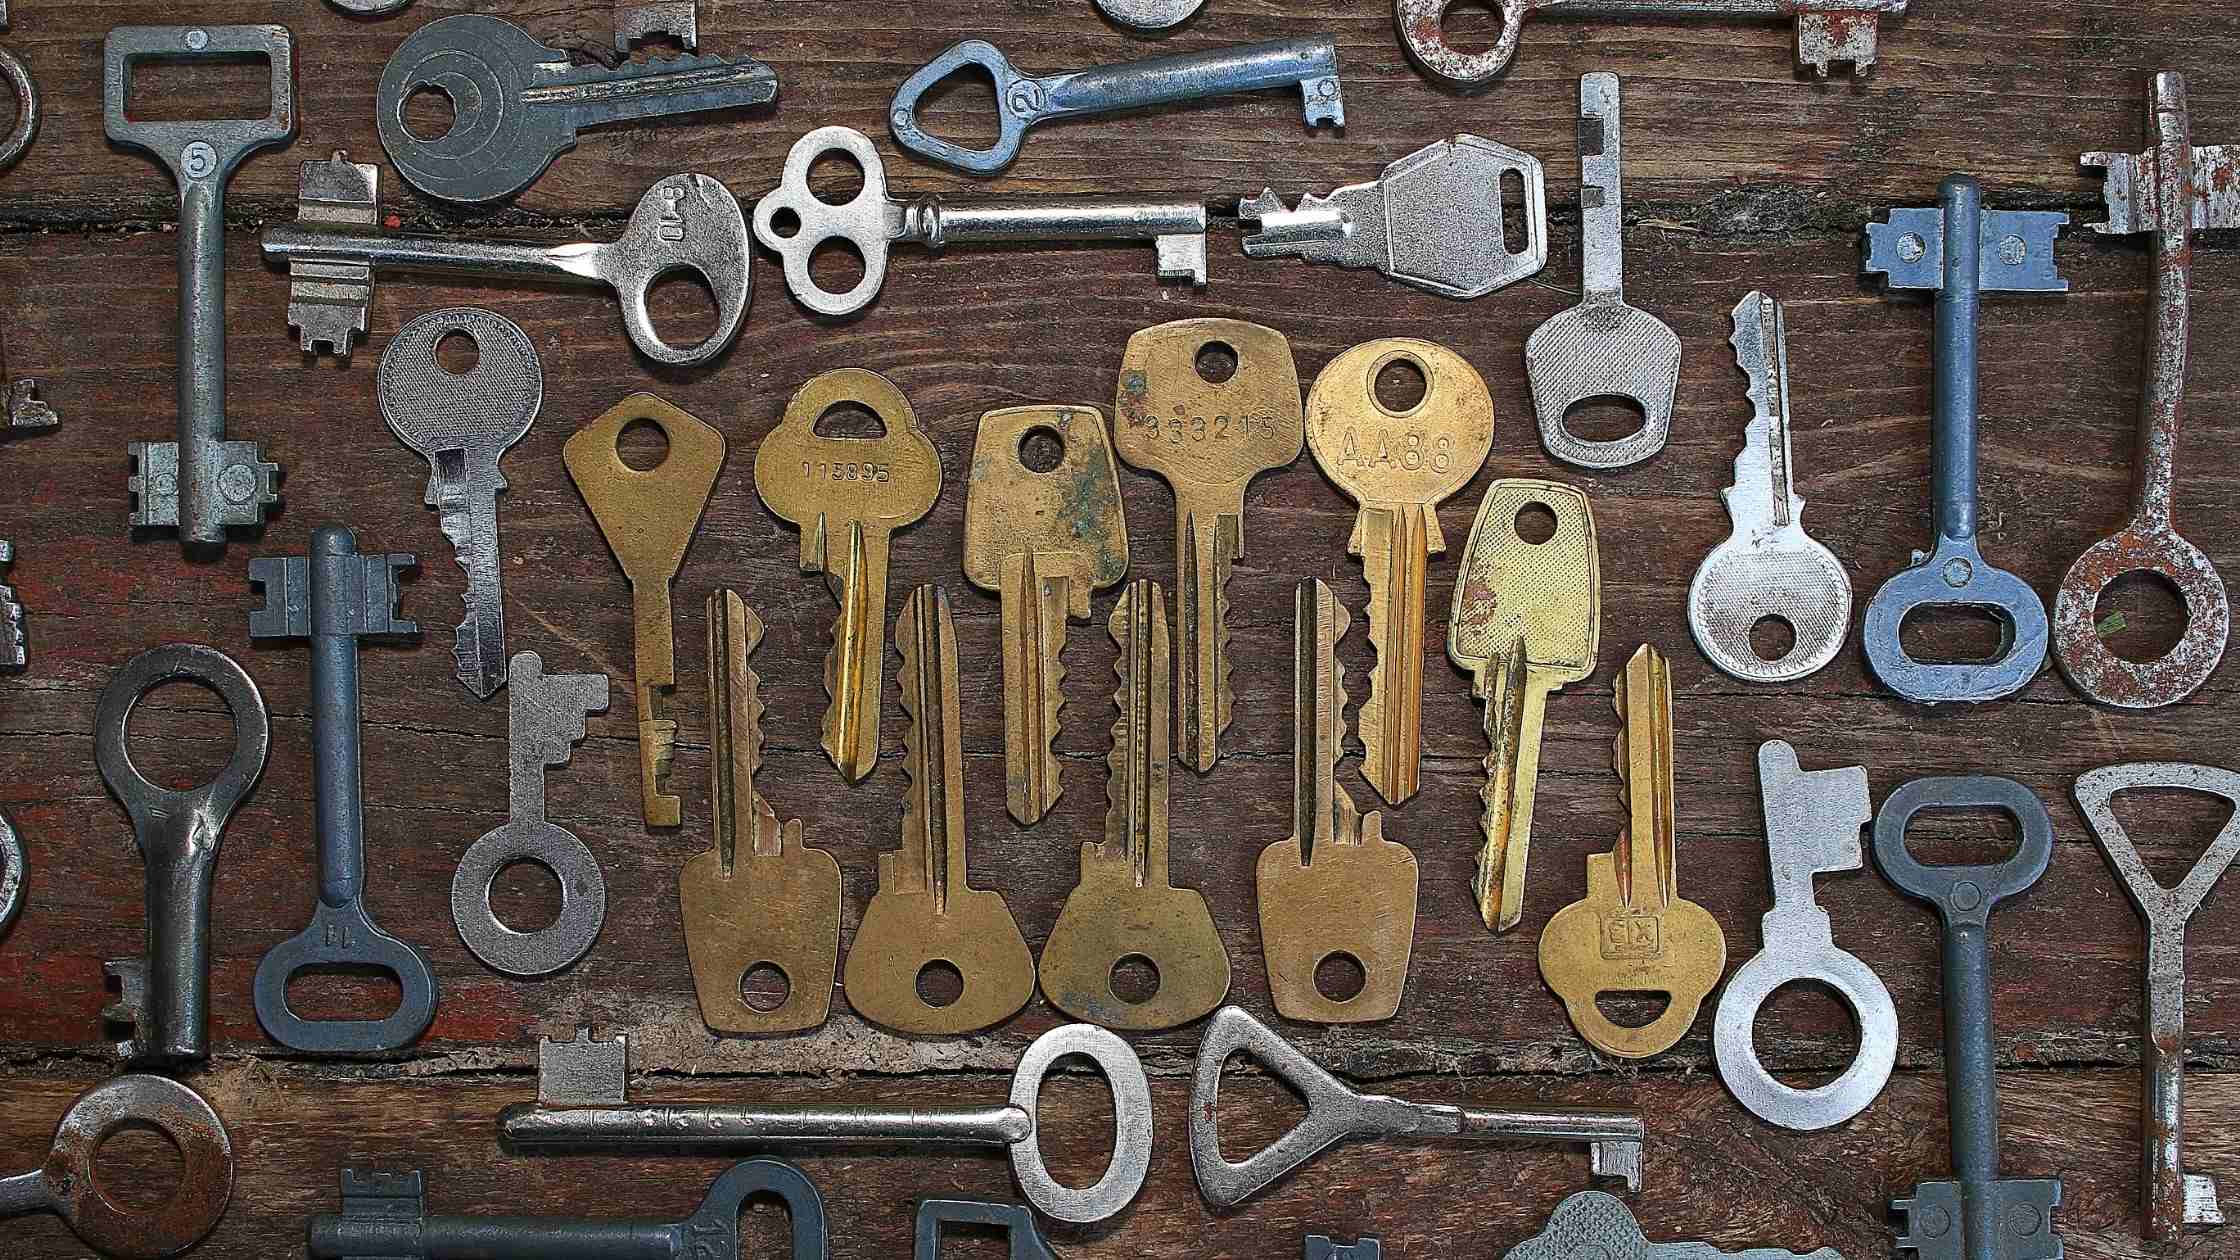 API security concept; keys of varying shapes and sizes on a wooden board